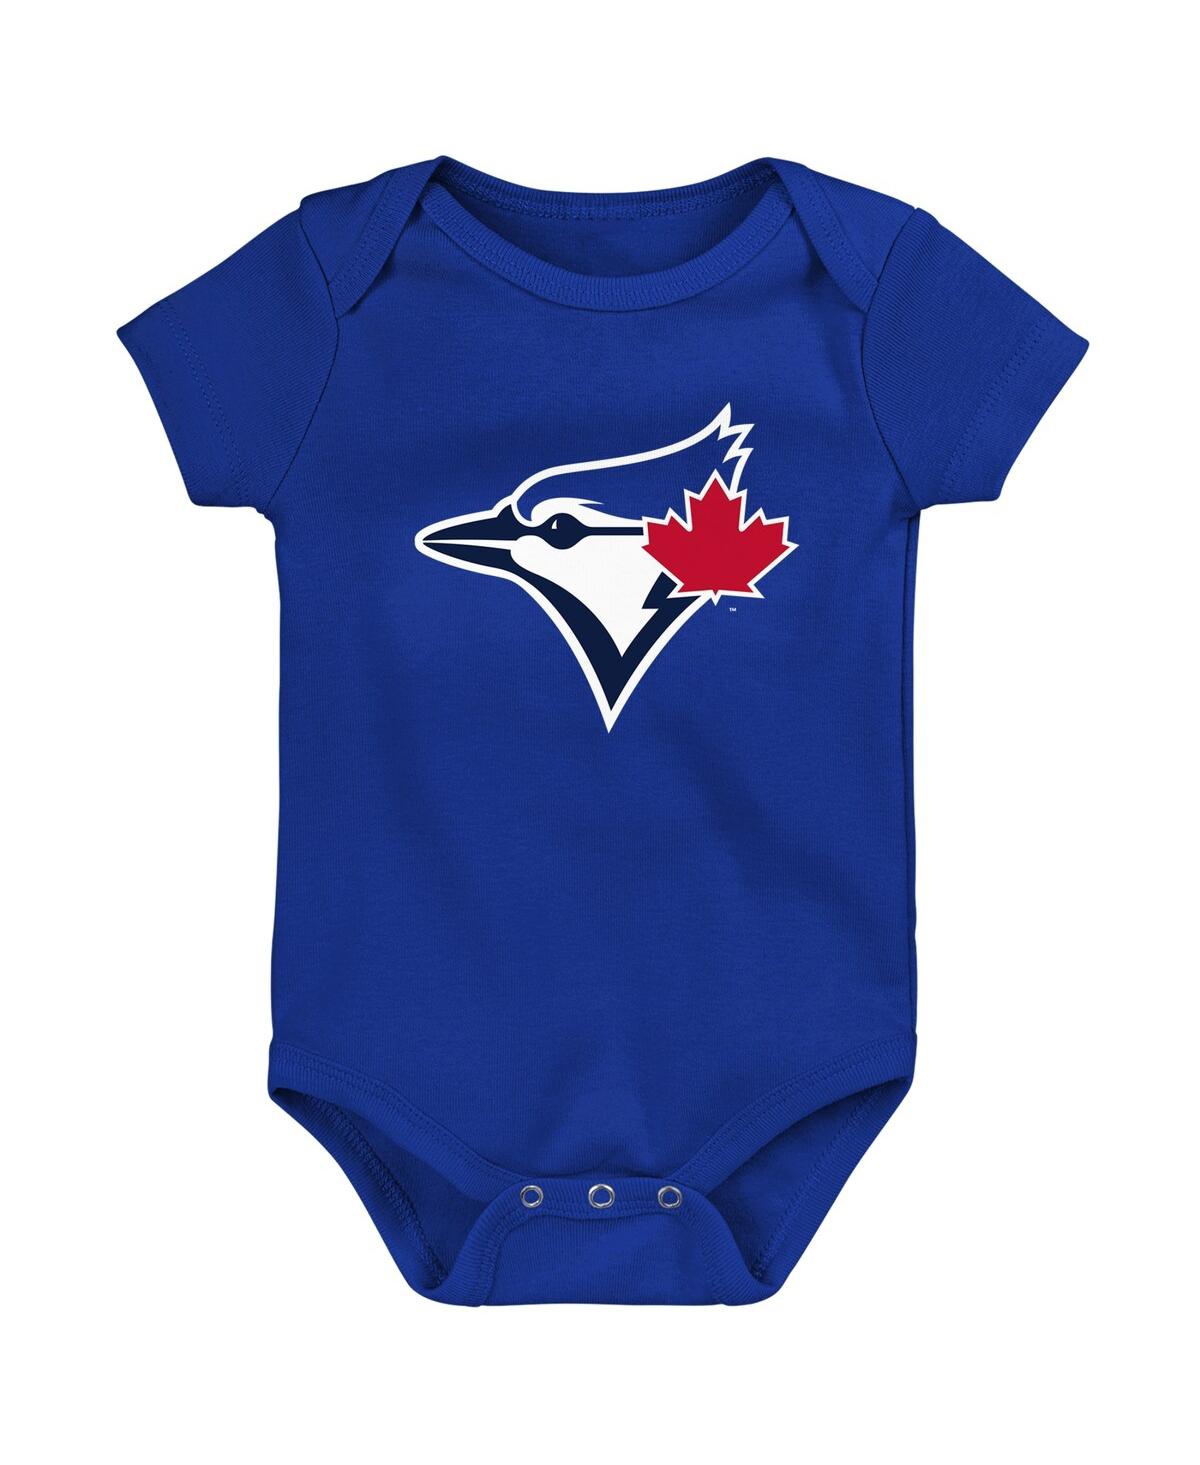 Outerstuff Babies' Newborn And Infant Boys And Girls Royal Toronto Blue Jays Primary Team Logo Bodysuit